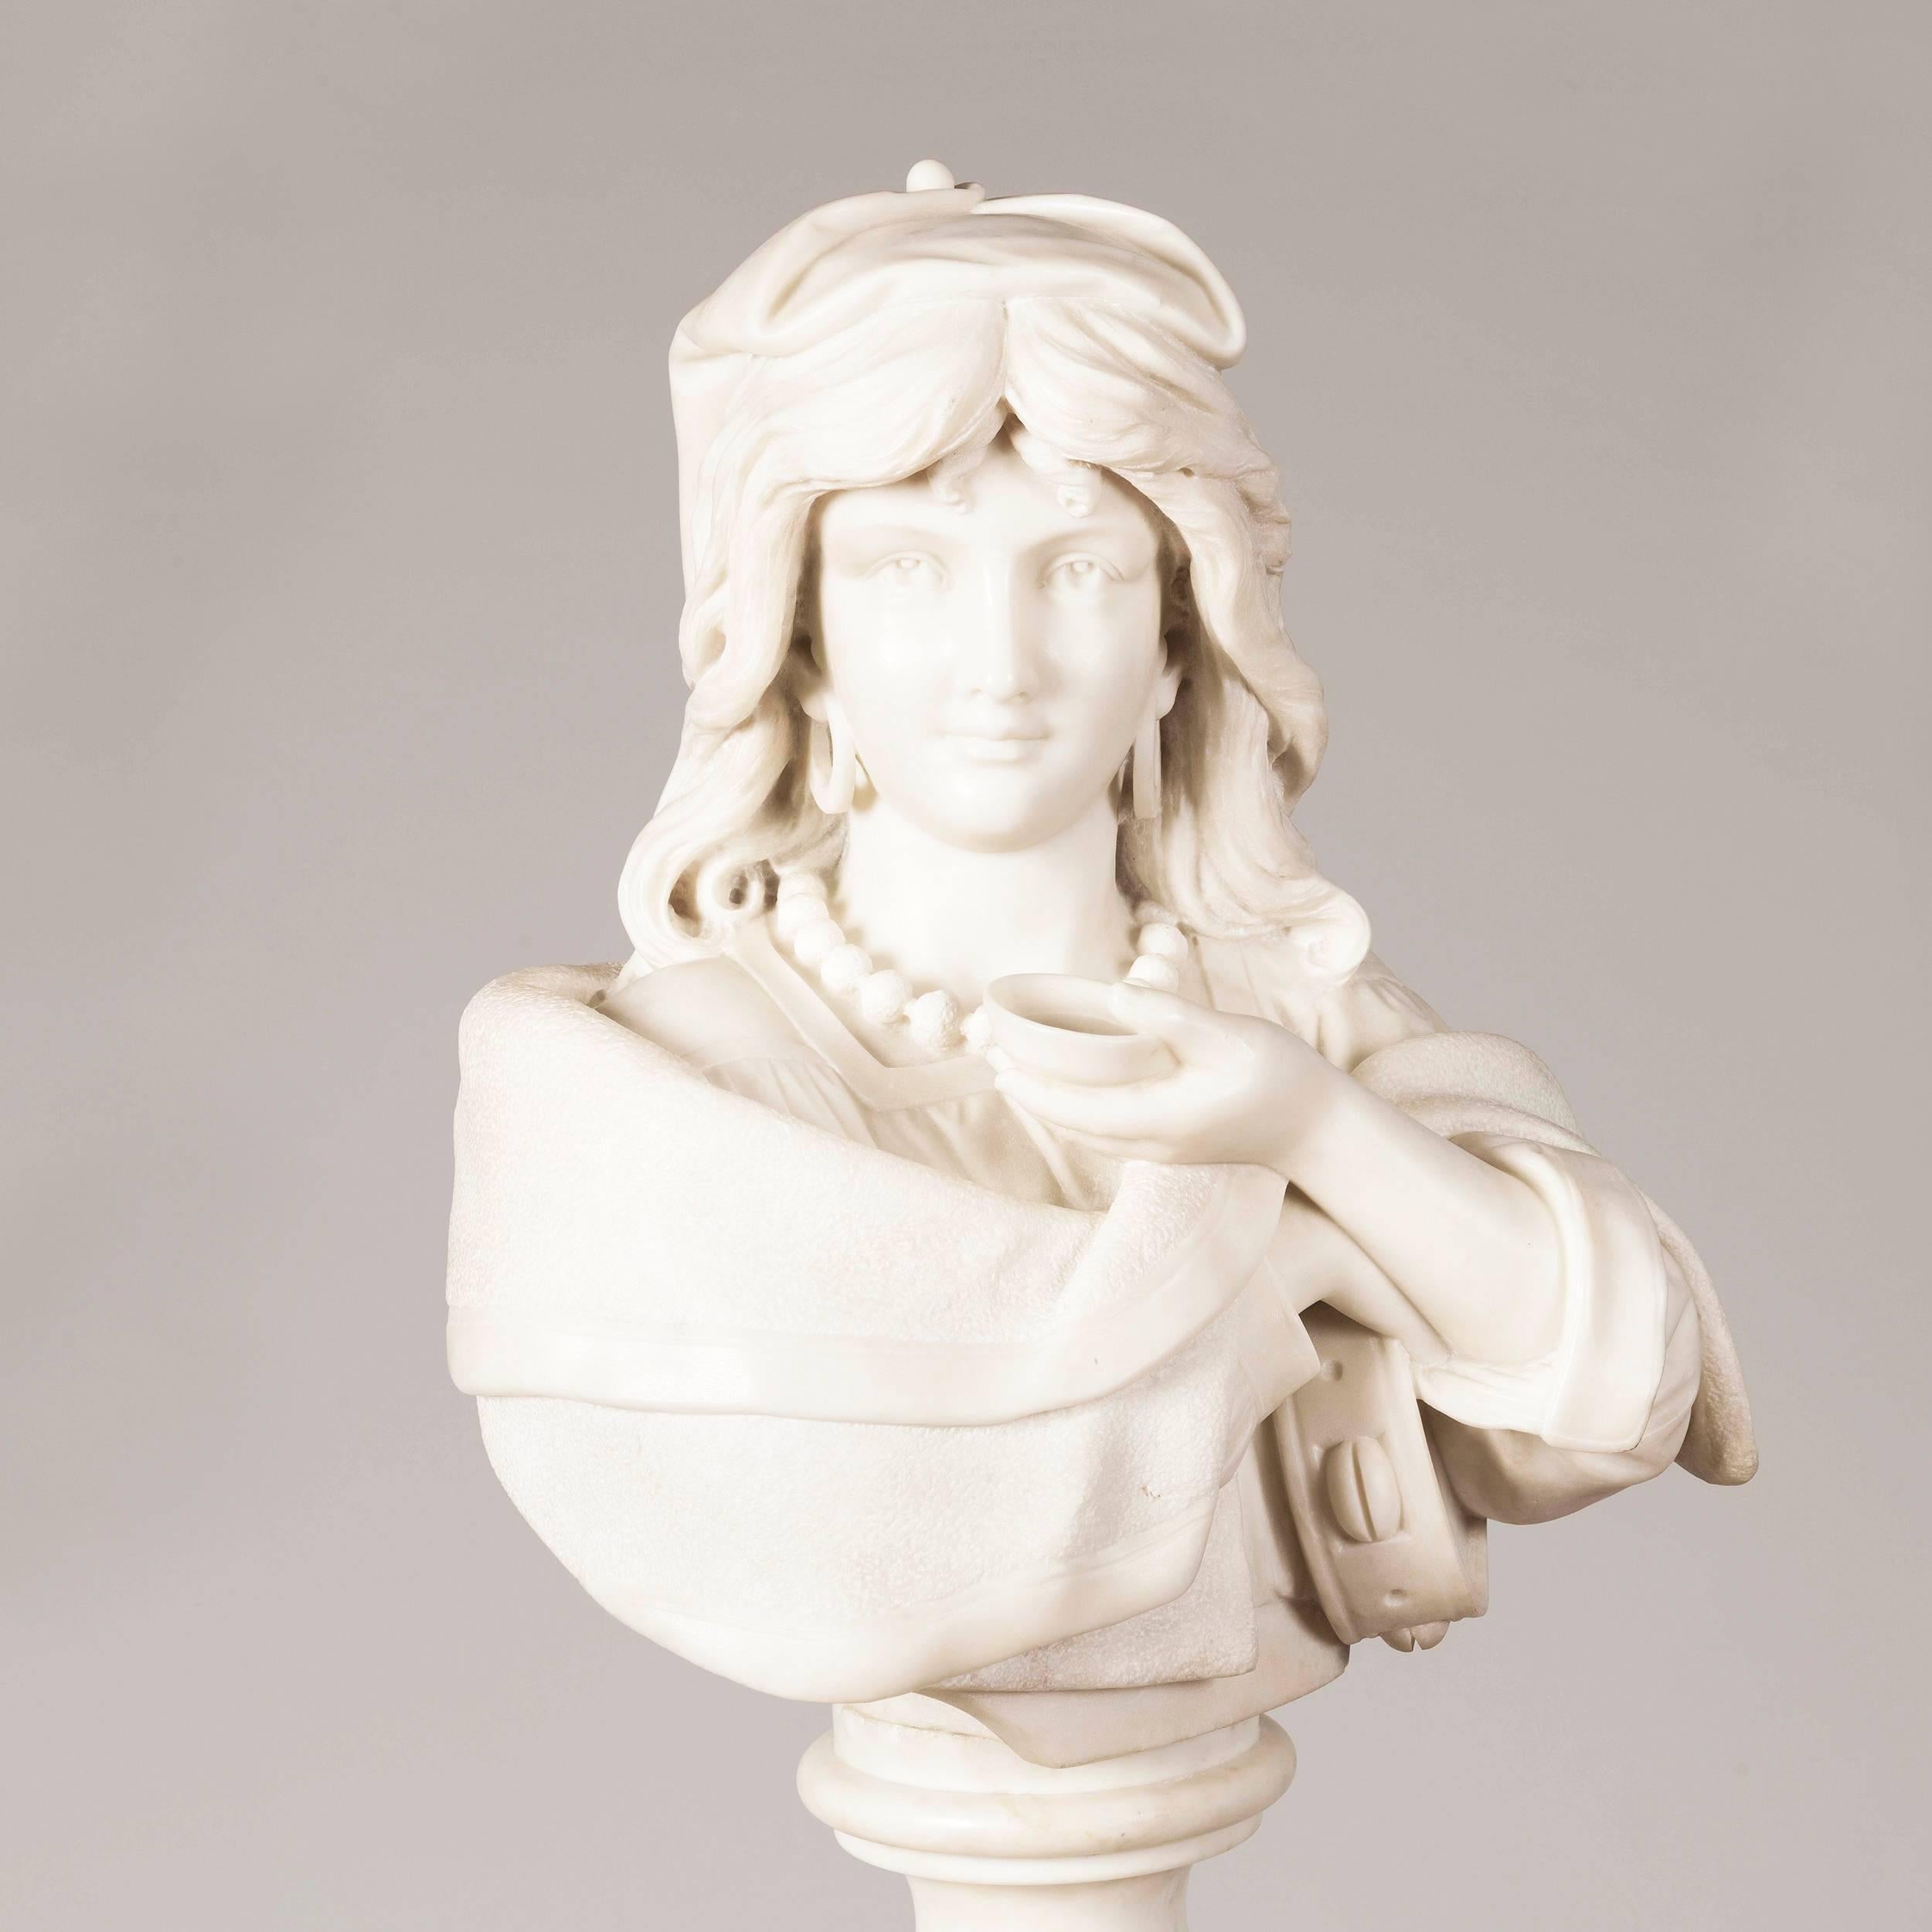 Signed by the sculptor 'Ruffini'

The bust of the coquettish smiling maiden, dressed in a mob cap, her bead necklet wearing hooped earrings, and holding her tambourine, is carved from white Carrara marble, and sits upon a circular turned and